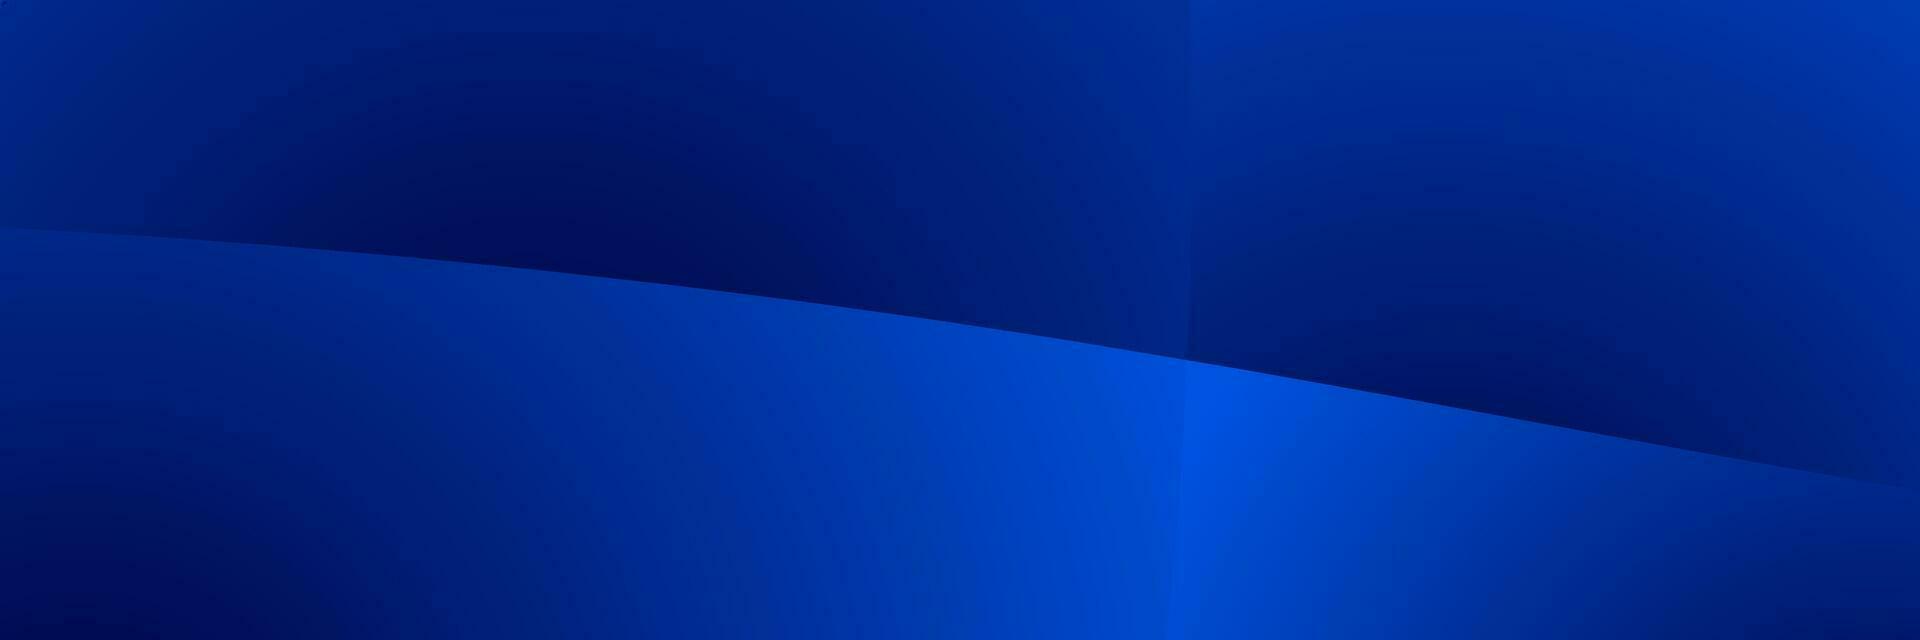 abstract blue wave gradient background vector